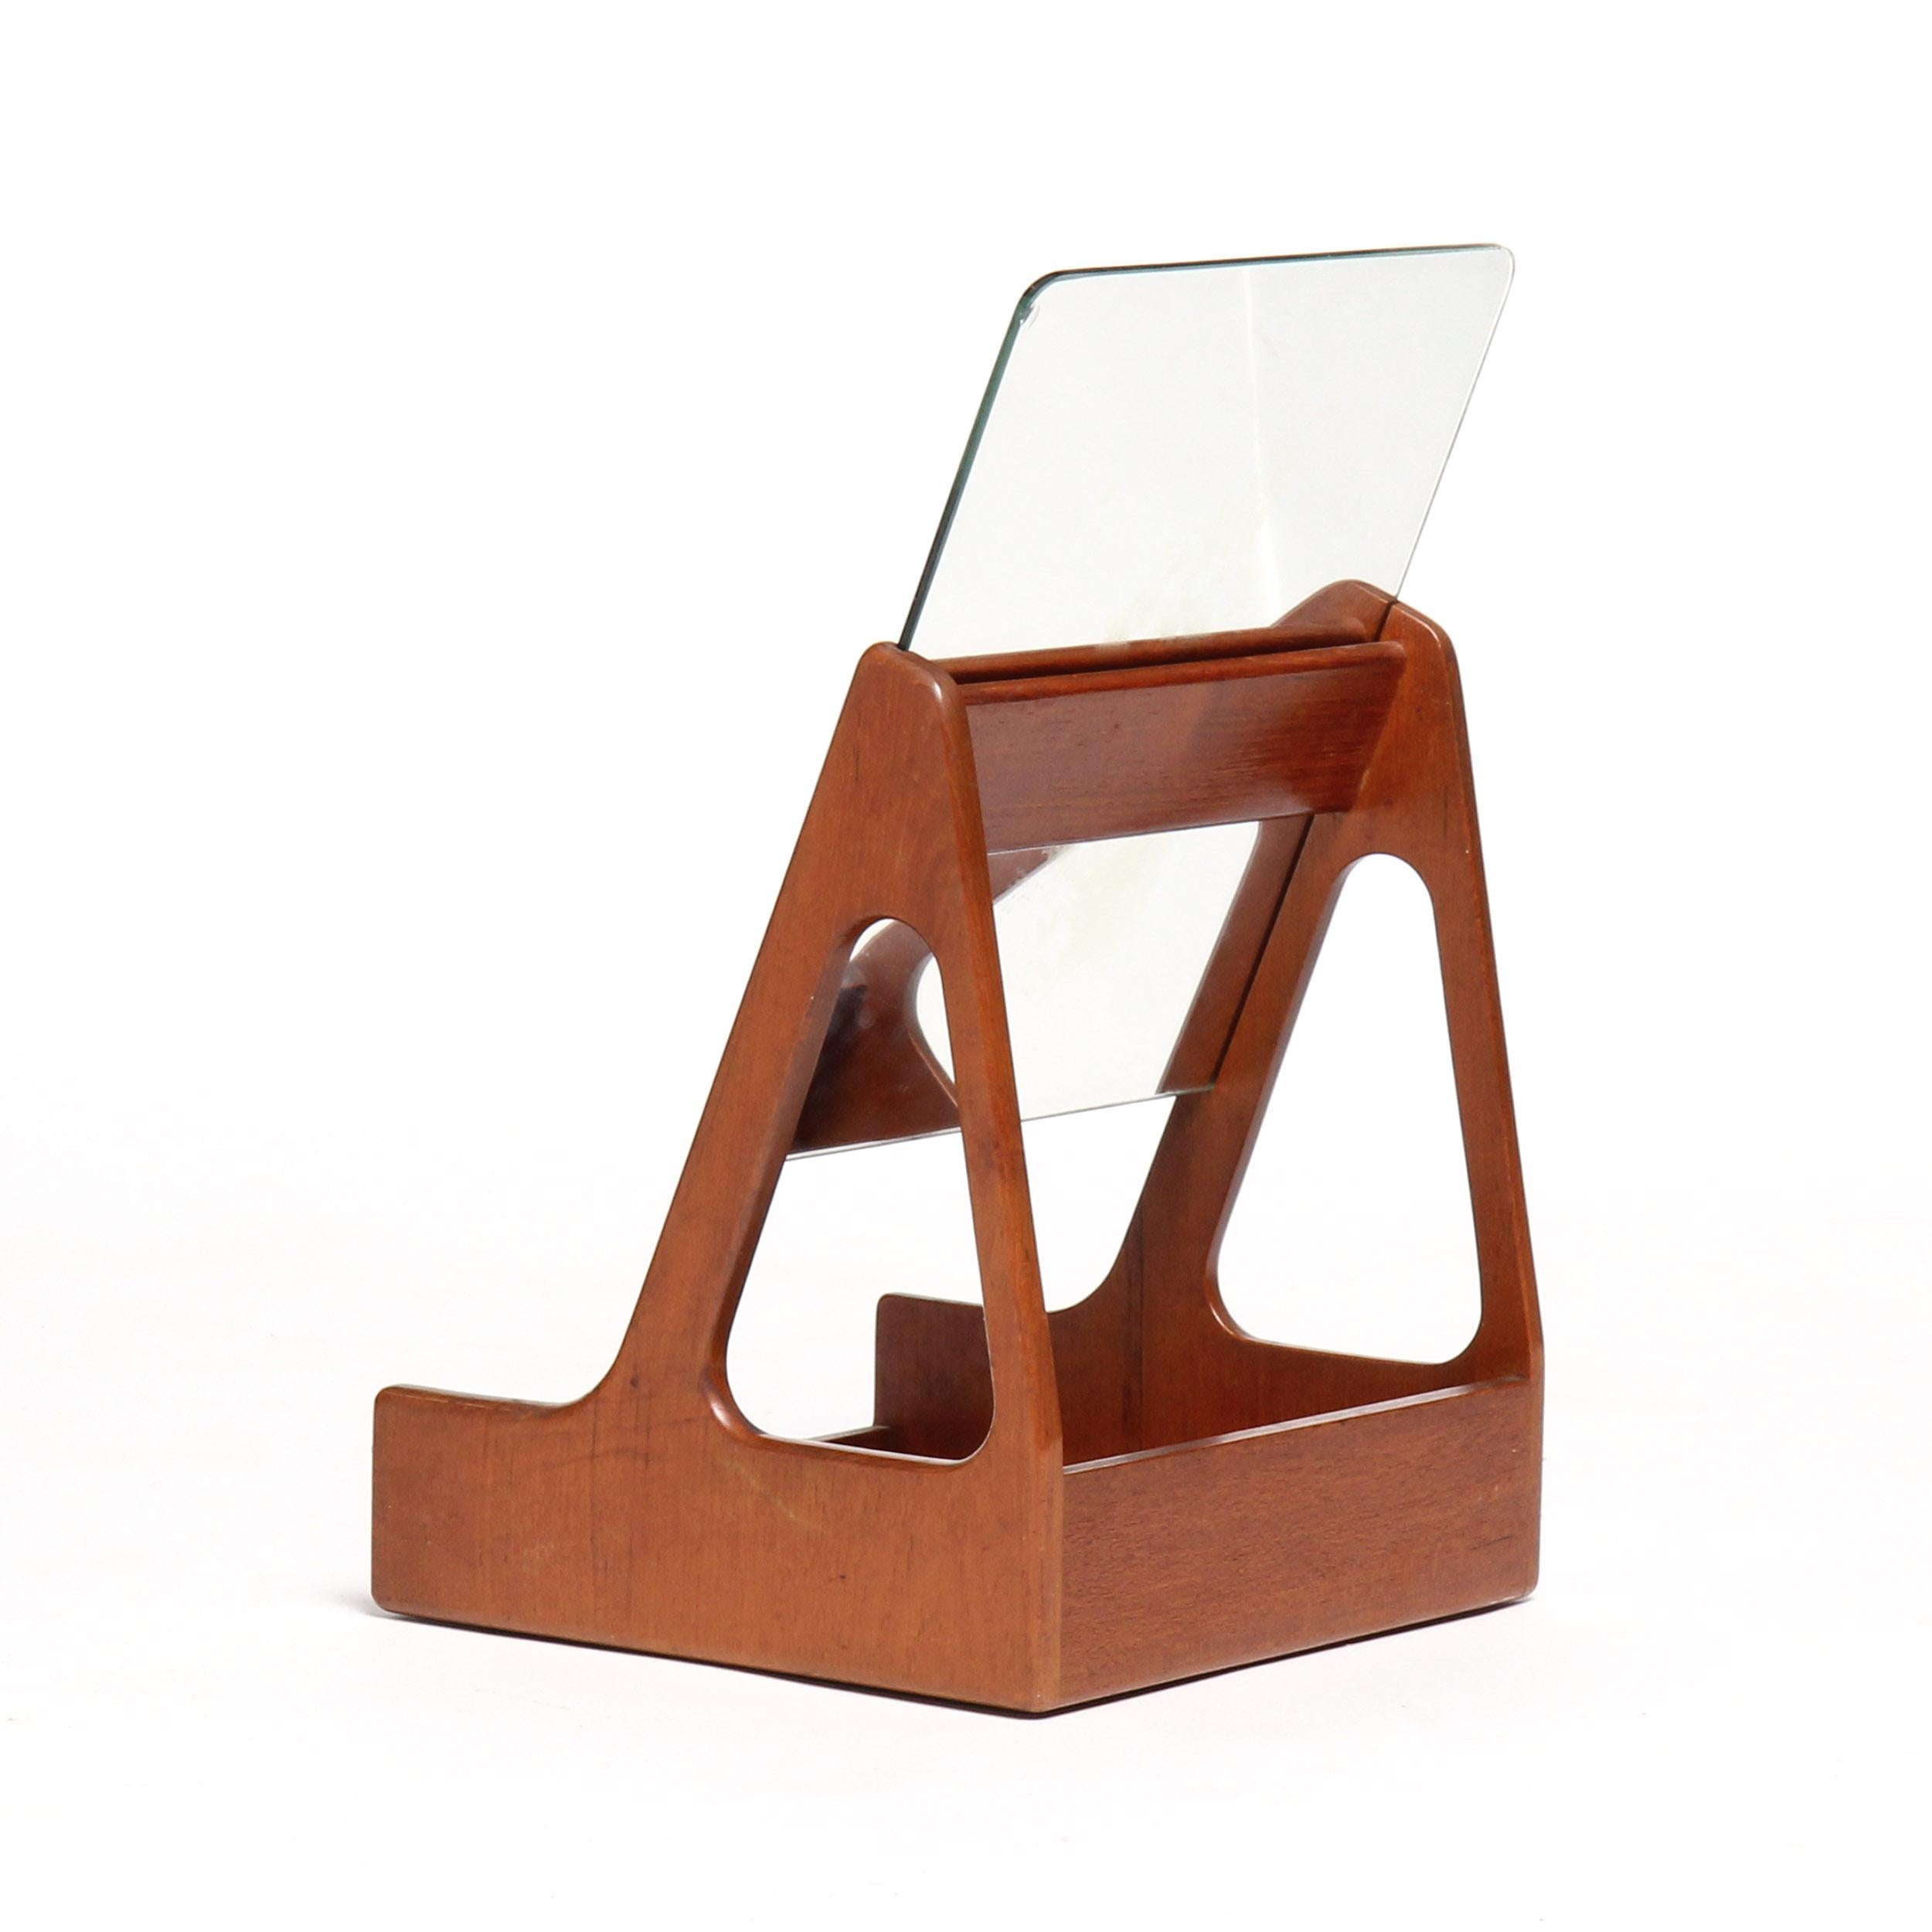 A simple teak beauty box with an open frame, slide-in mirror and a tray base.